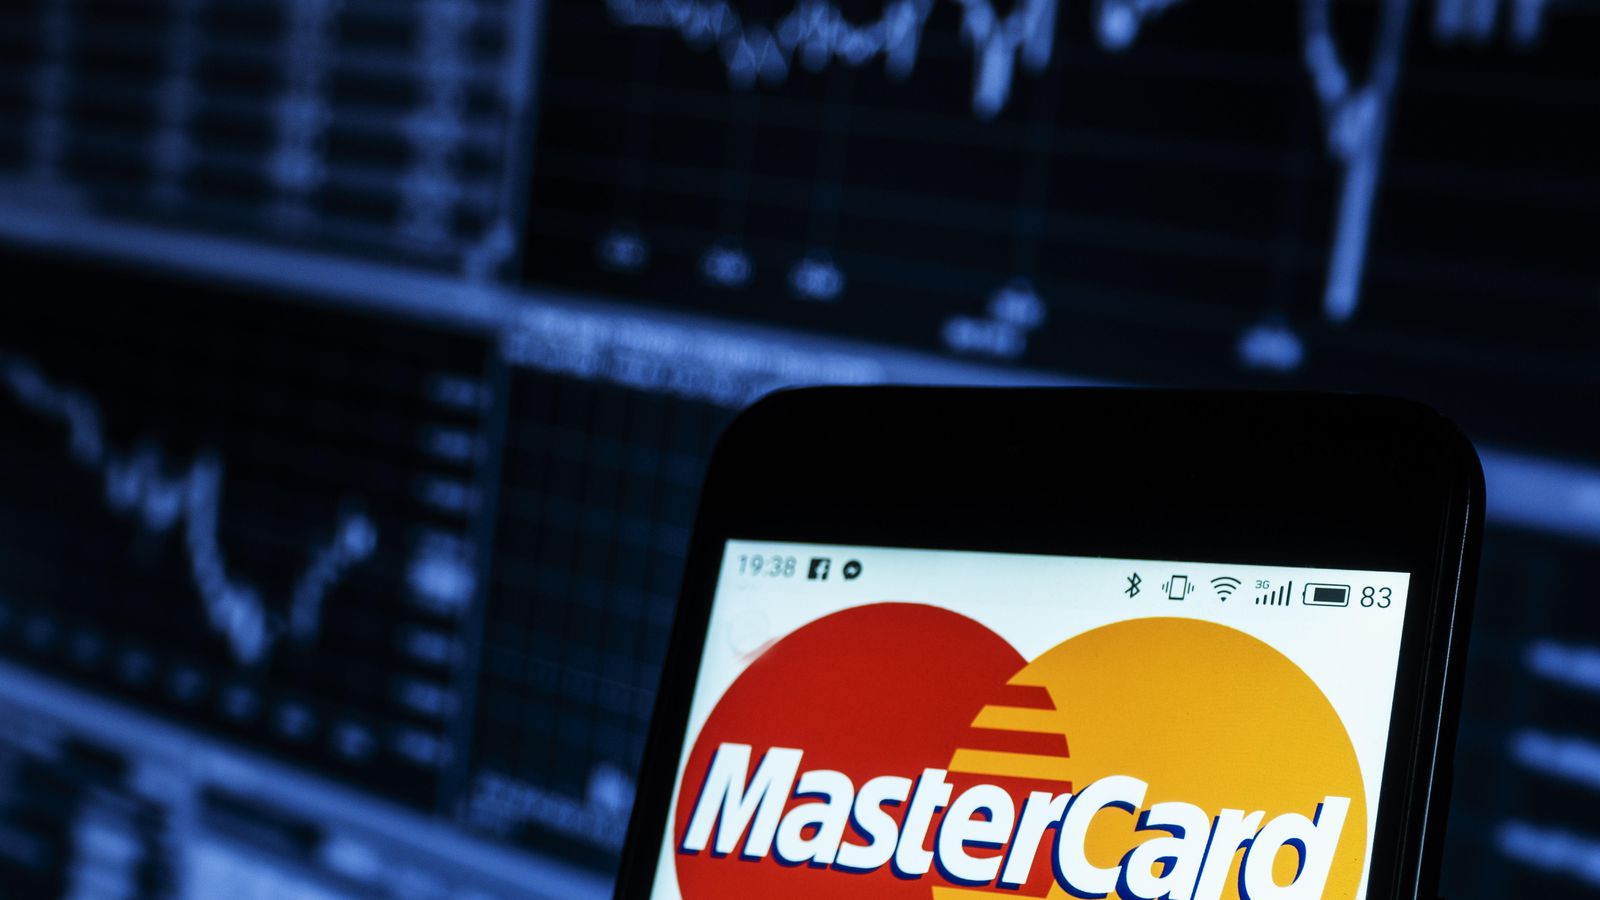 Google Edly Had Deal With Mastercard To Track Retail Sales